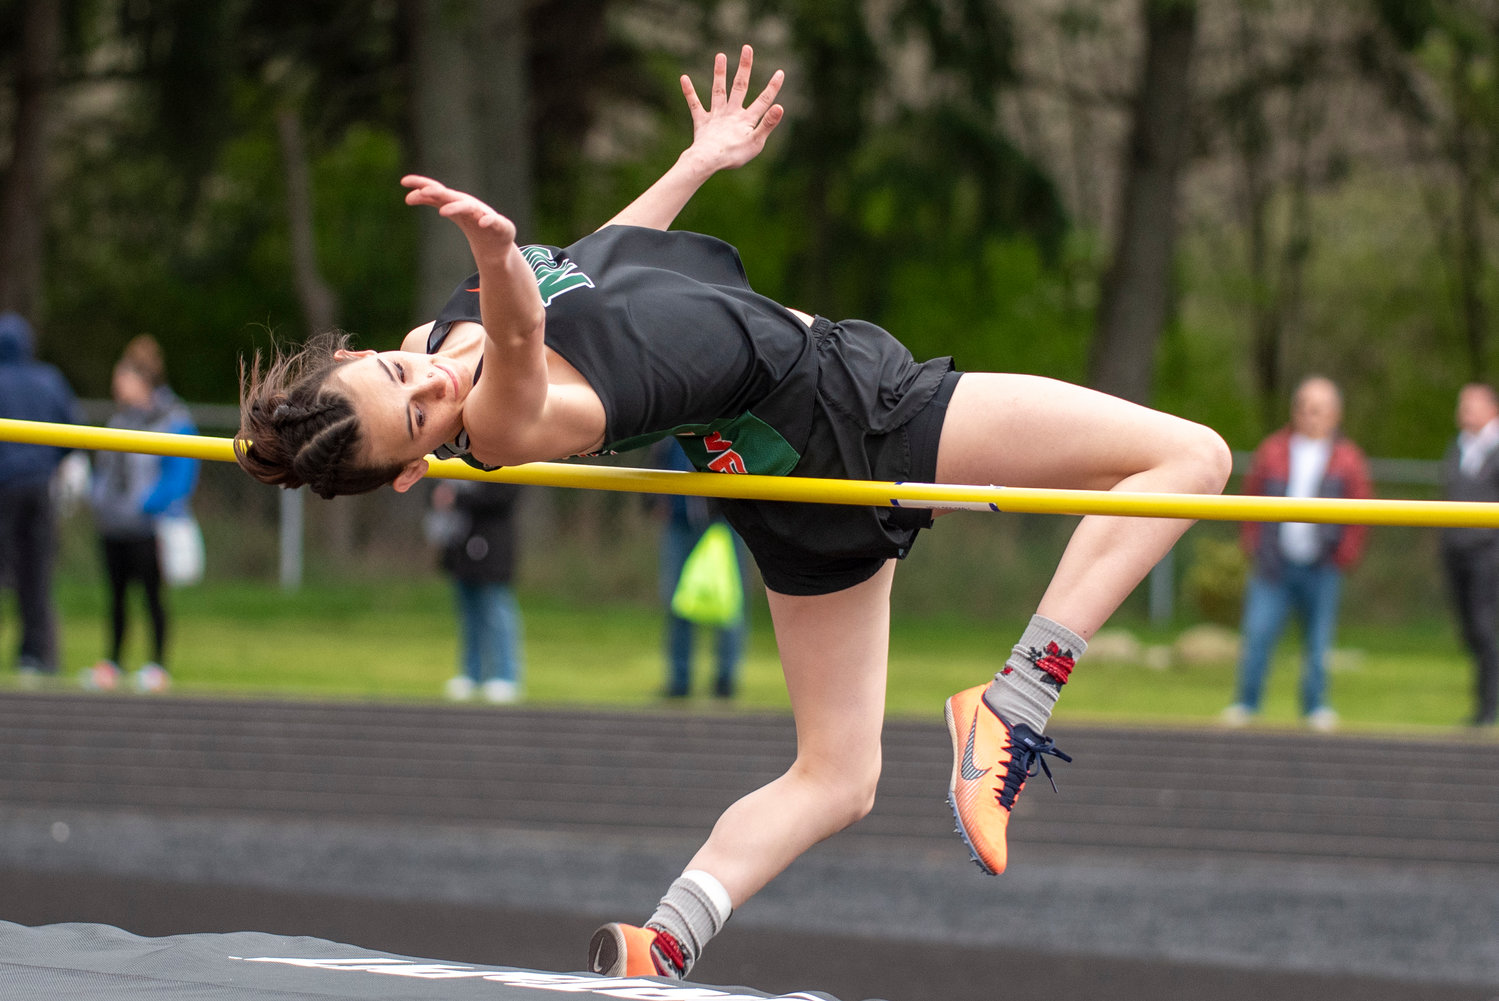 Morton-White Pass sophomore MIranda Sparks won the girls high jump with a leap of 4 feet, 8 inches at a meet in Tenino on March 29.